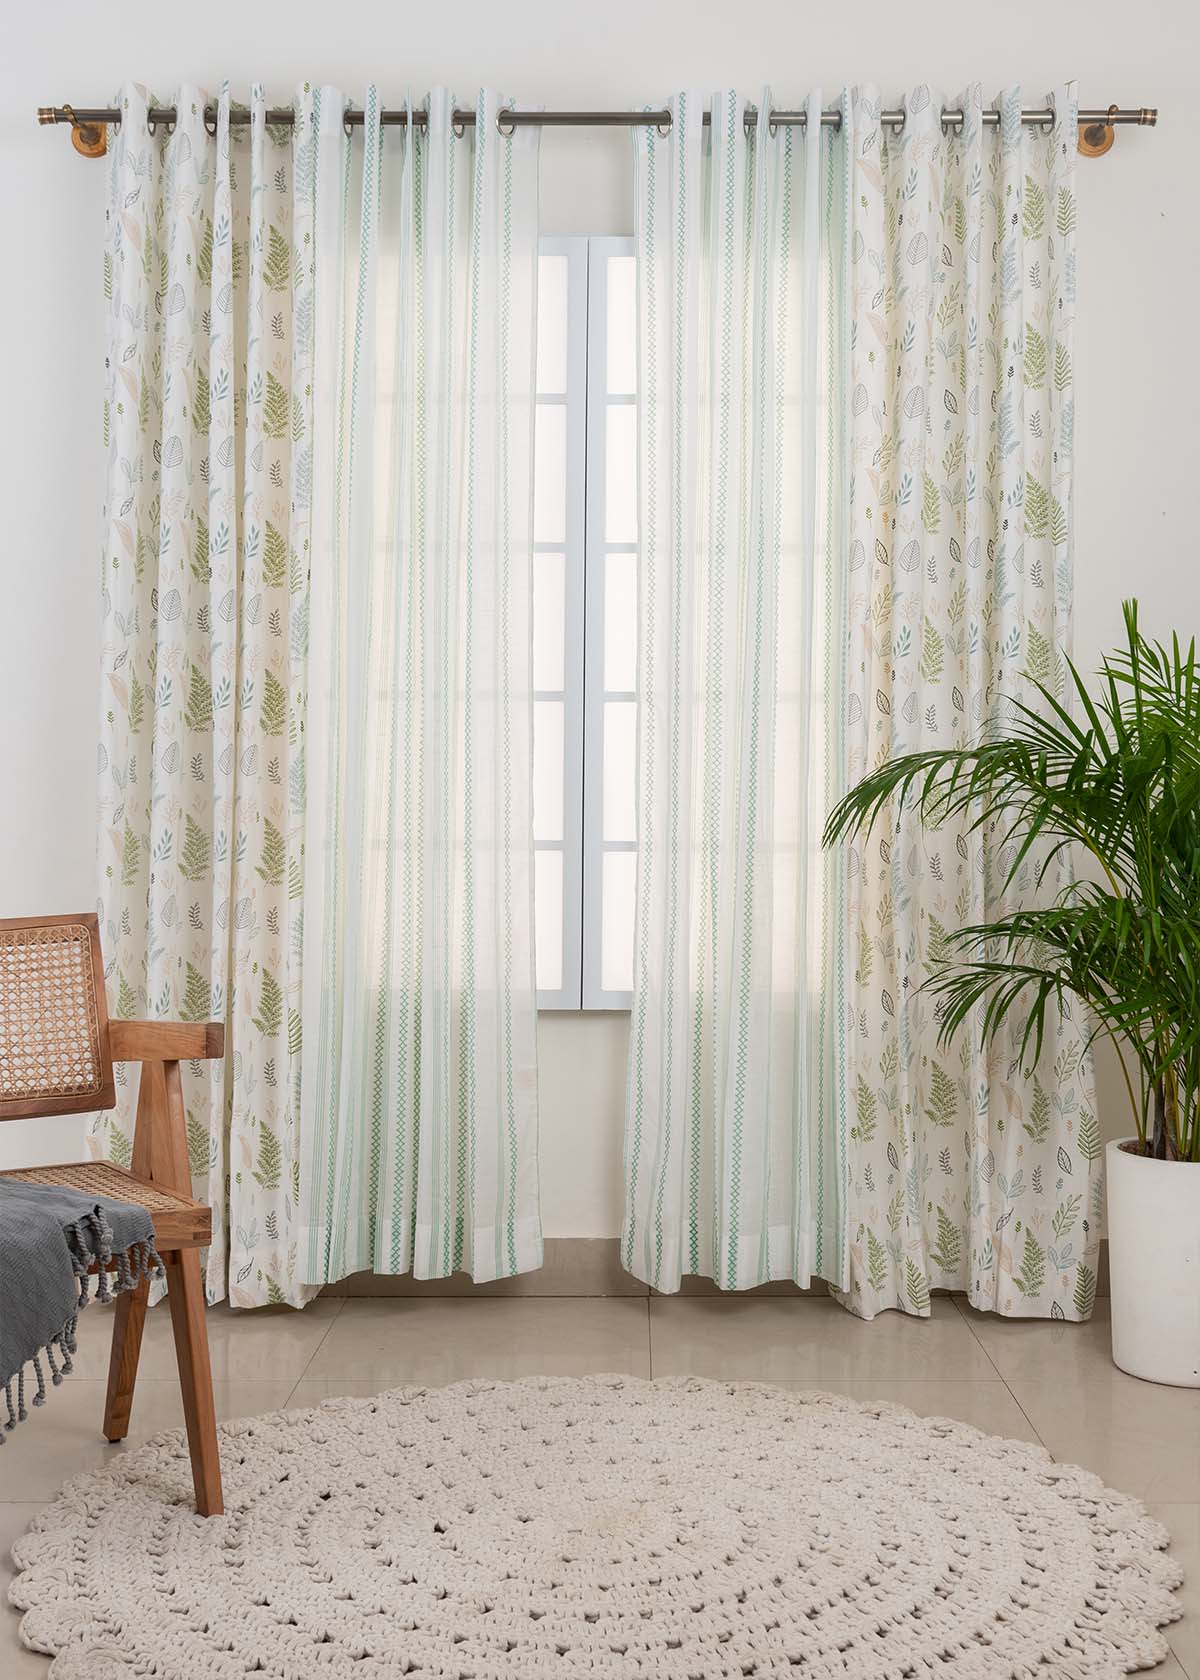 Rustling Leaves, Picket Fence Sage Green Sheer Set Of 4 Combo Cotton Curtain - Green